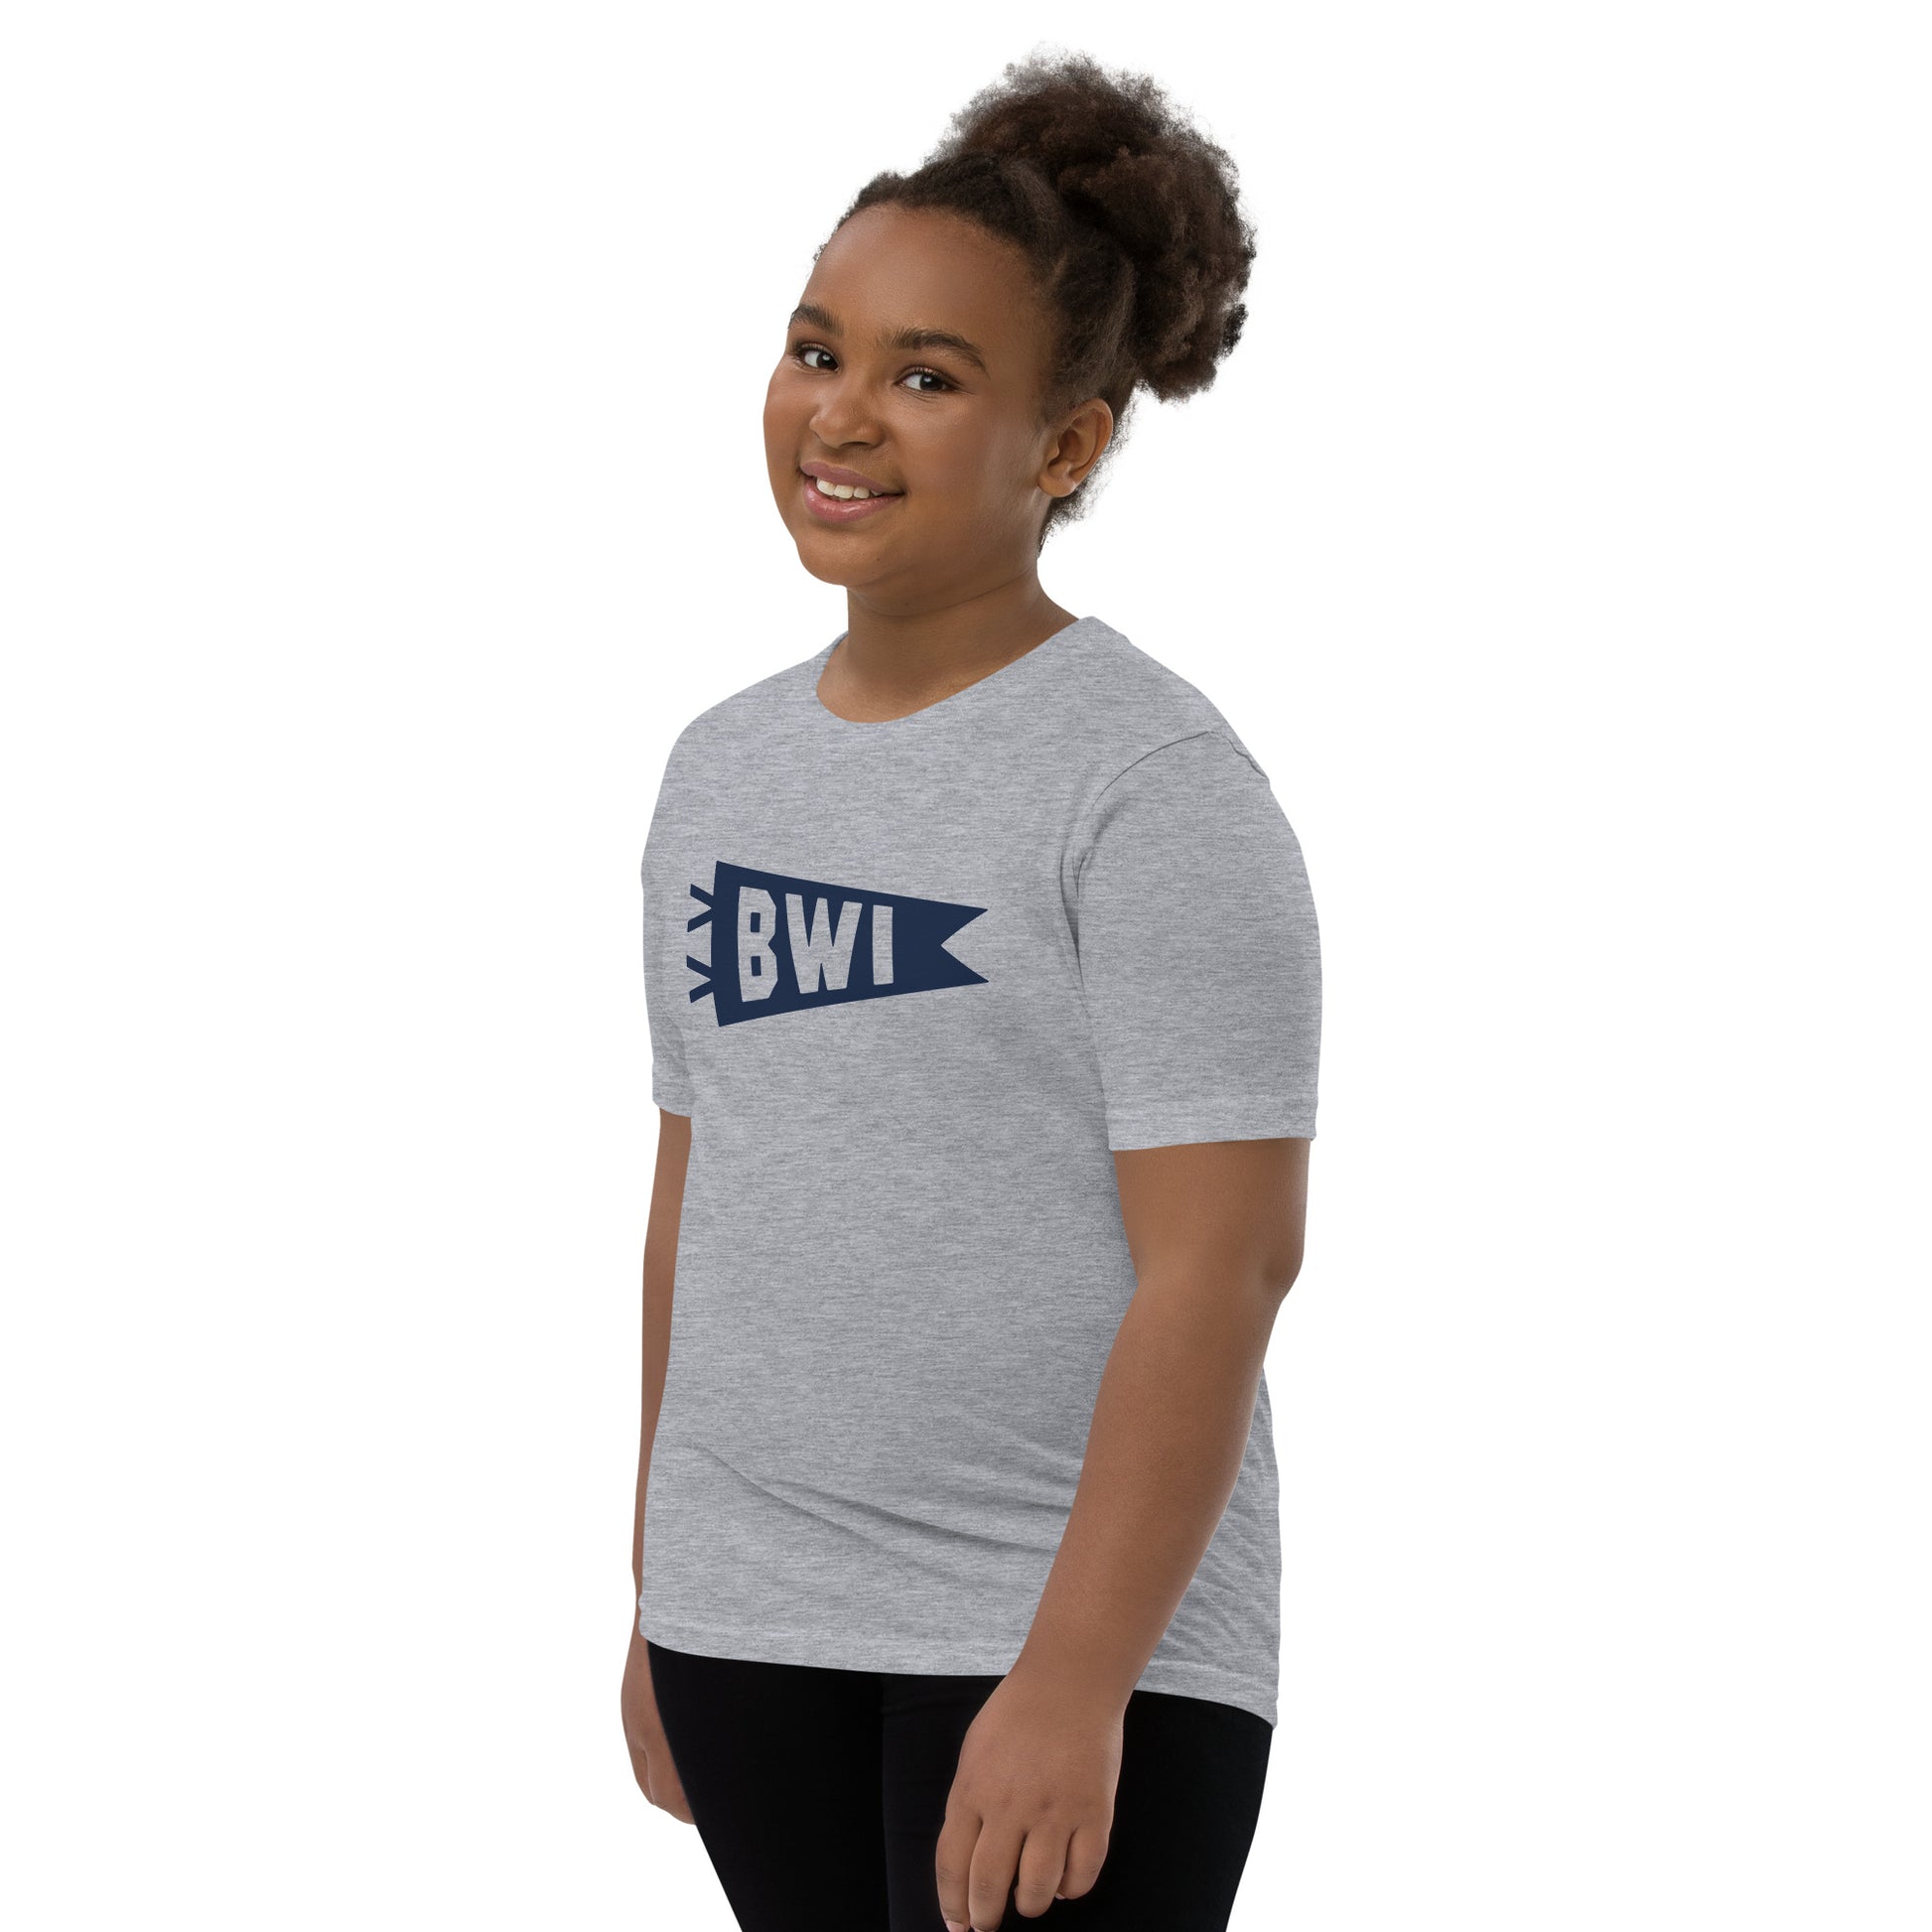 Kid's Airport Code Tee - Navy Blue Graphic • BWI Baltimore • YHM Designs - Image 04